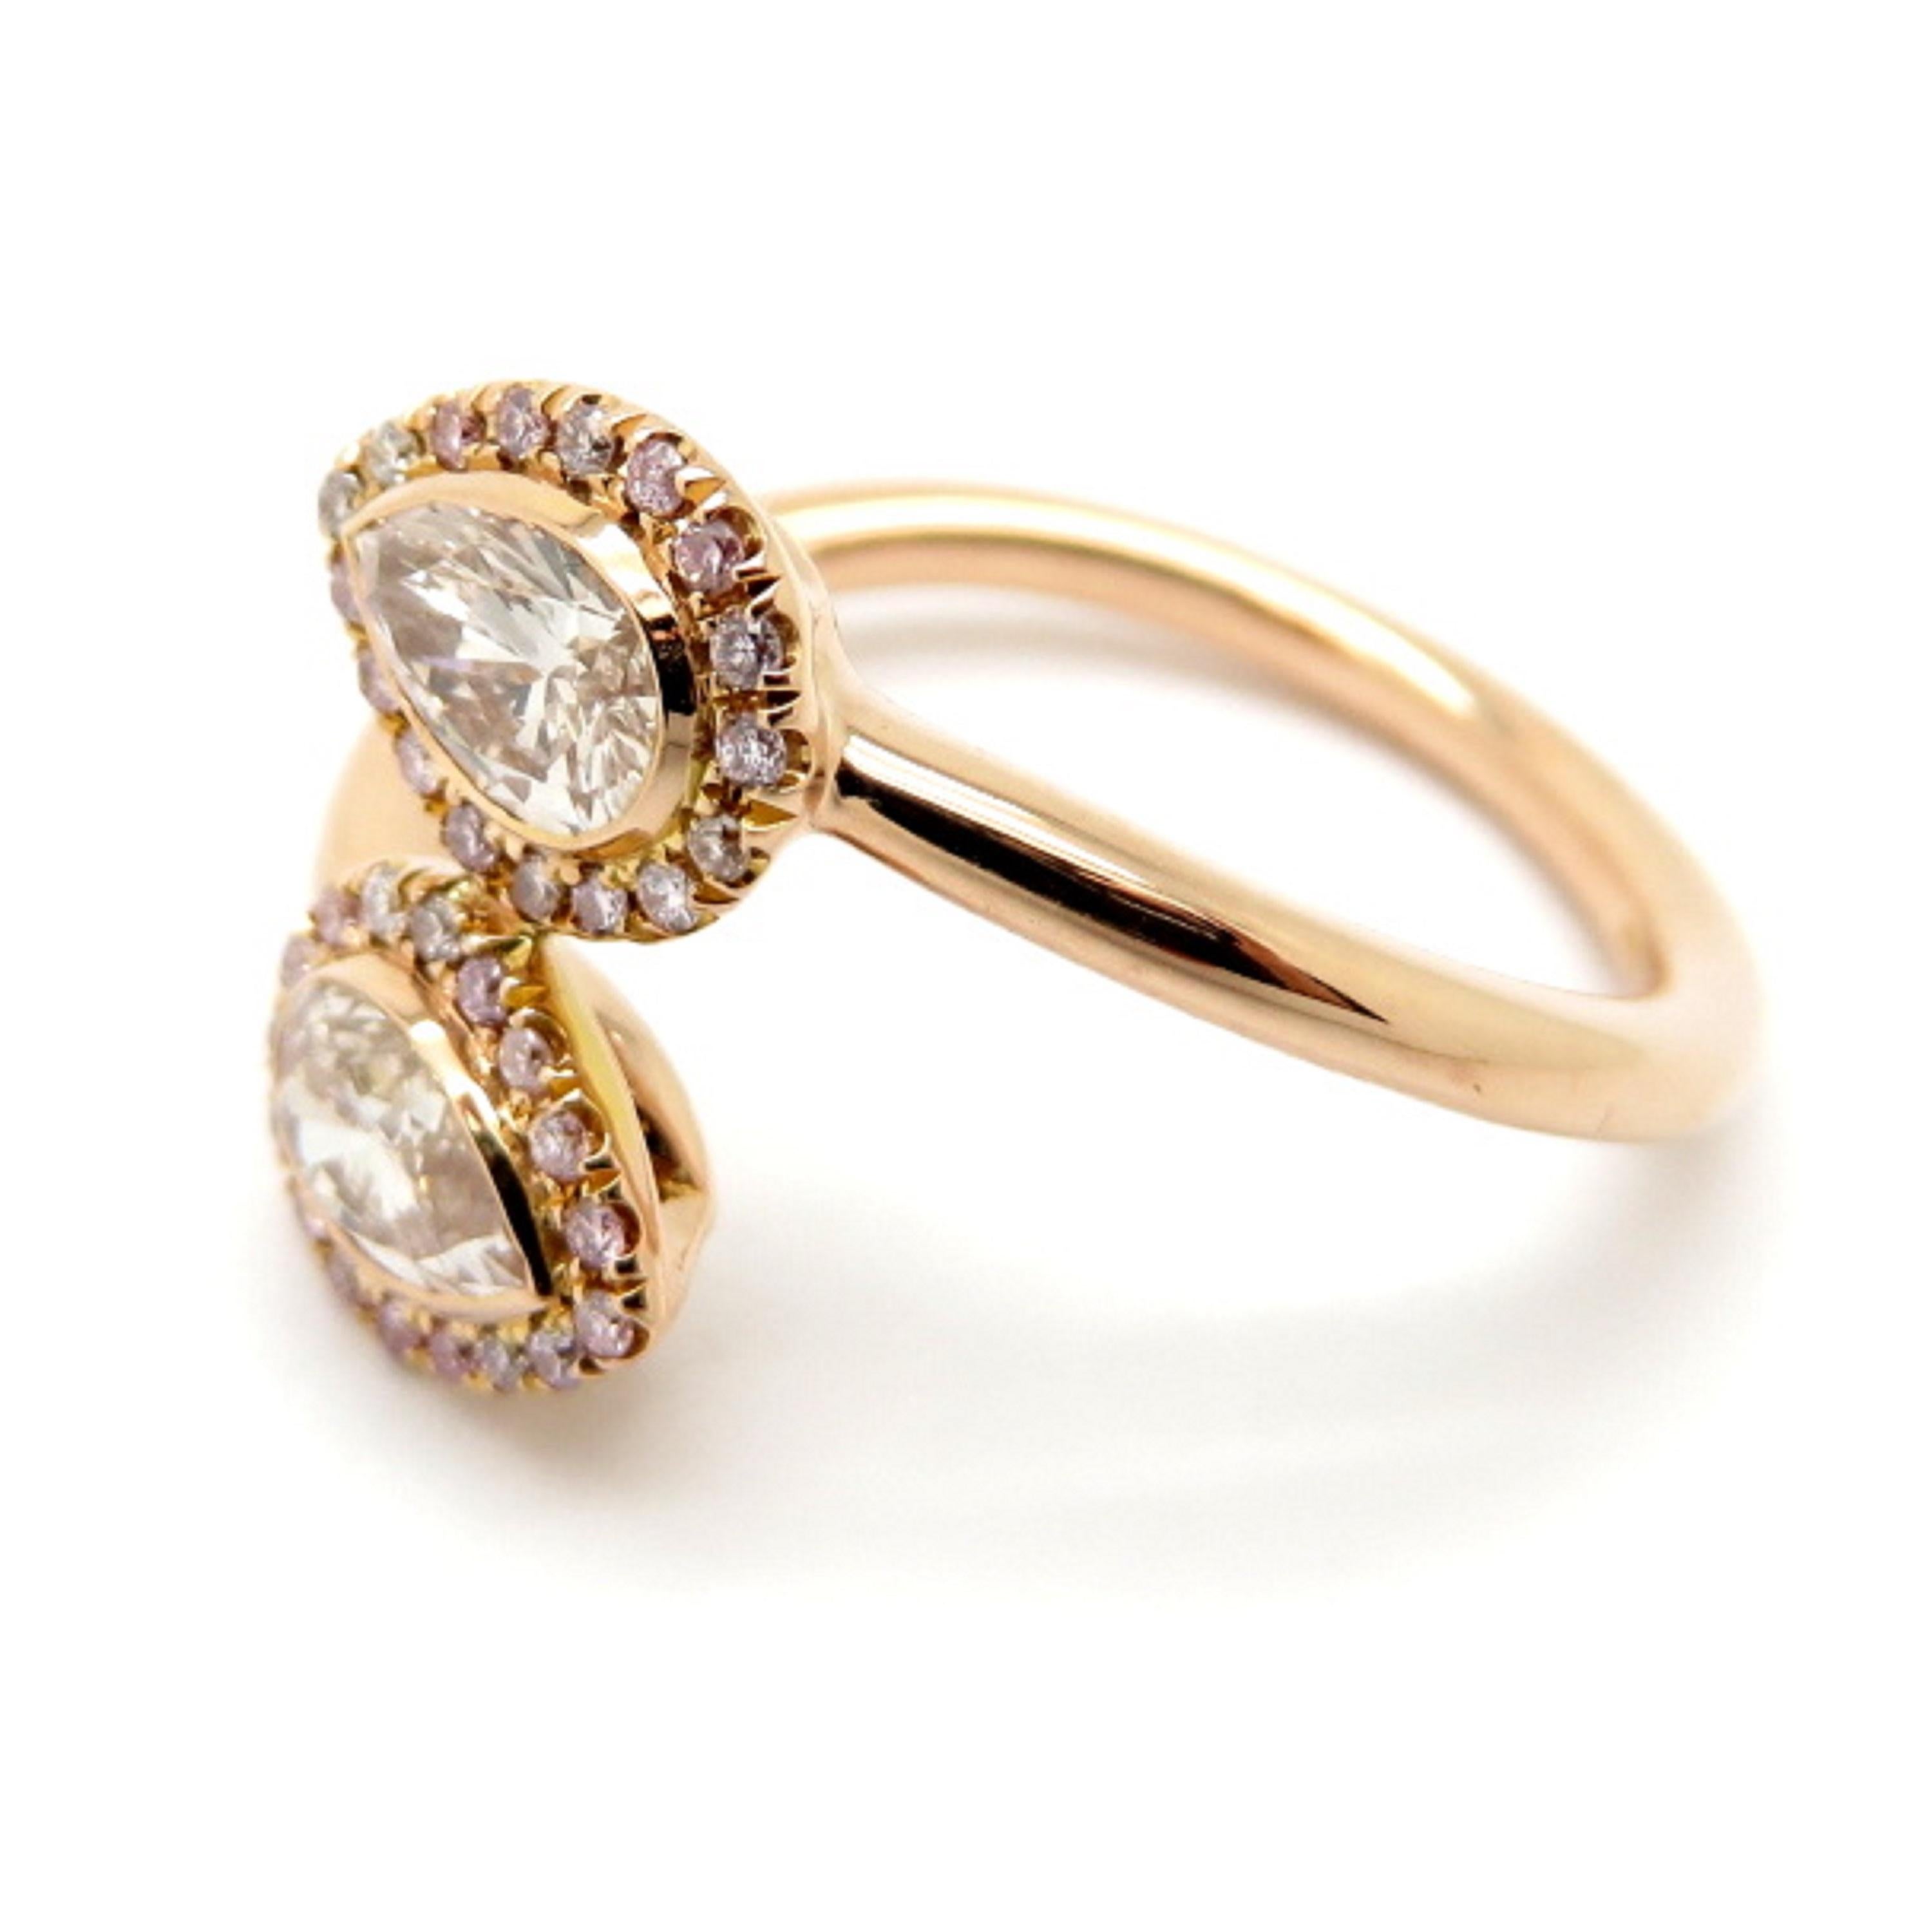 For sale is a beautiful diamond halo ring featuring pink diamonds! It is crafted out of solid 18K rose gold. Showcasing two (2) bezel set pink pear brilliant cut diamonds weighing approximately 0.67 carats total. Accenting the diamonds in a halo